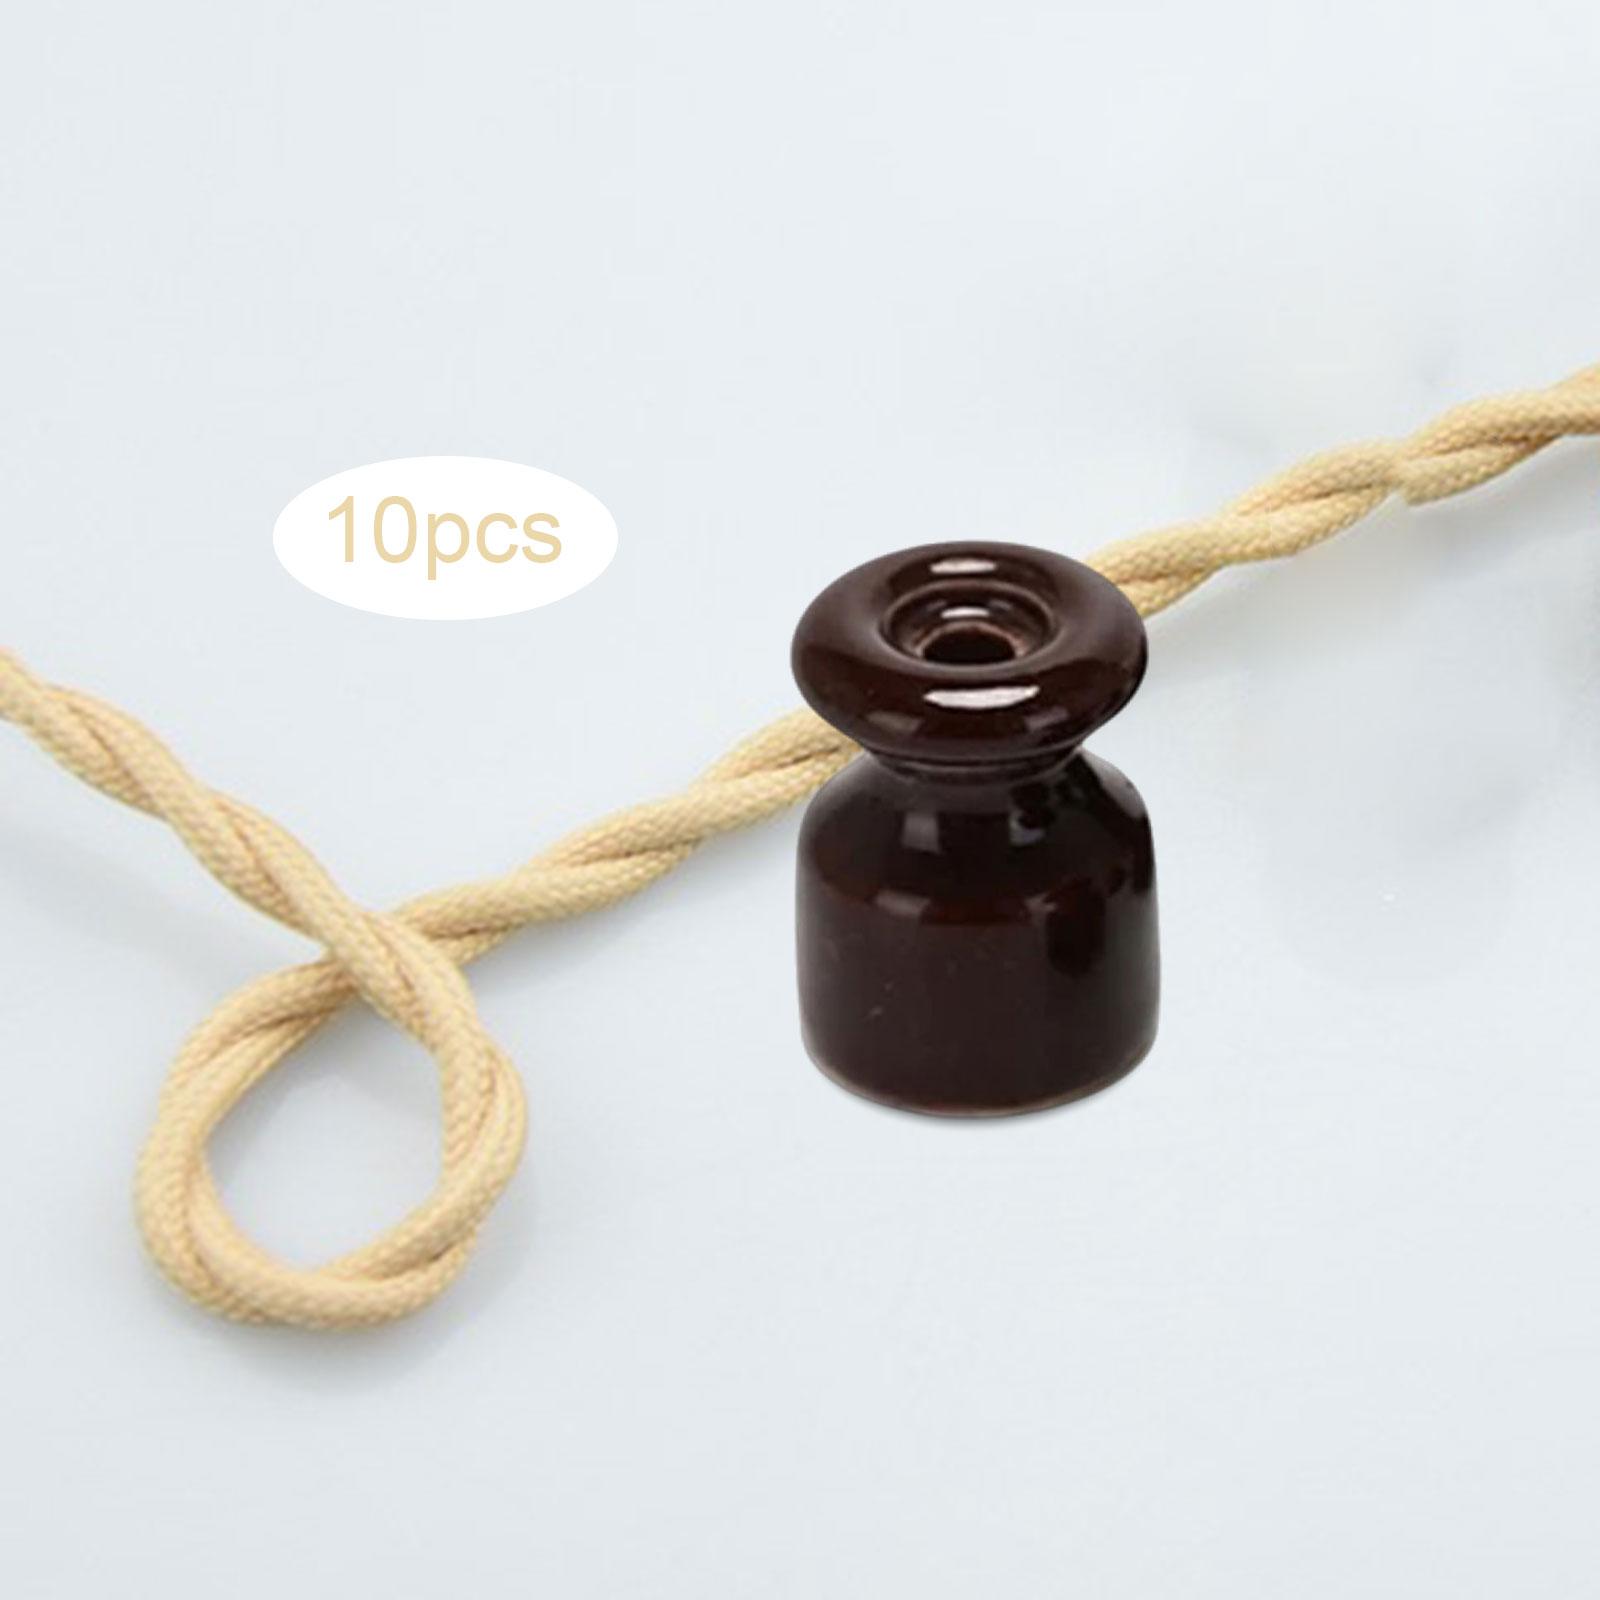 10x Porcelain Insulators Electrical Accessories for Wall Wiring Twisted Cord Brown